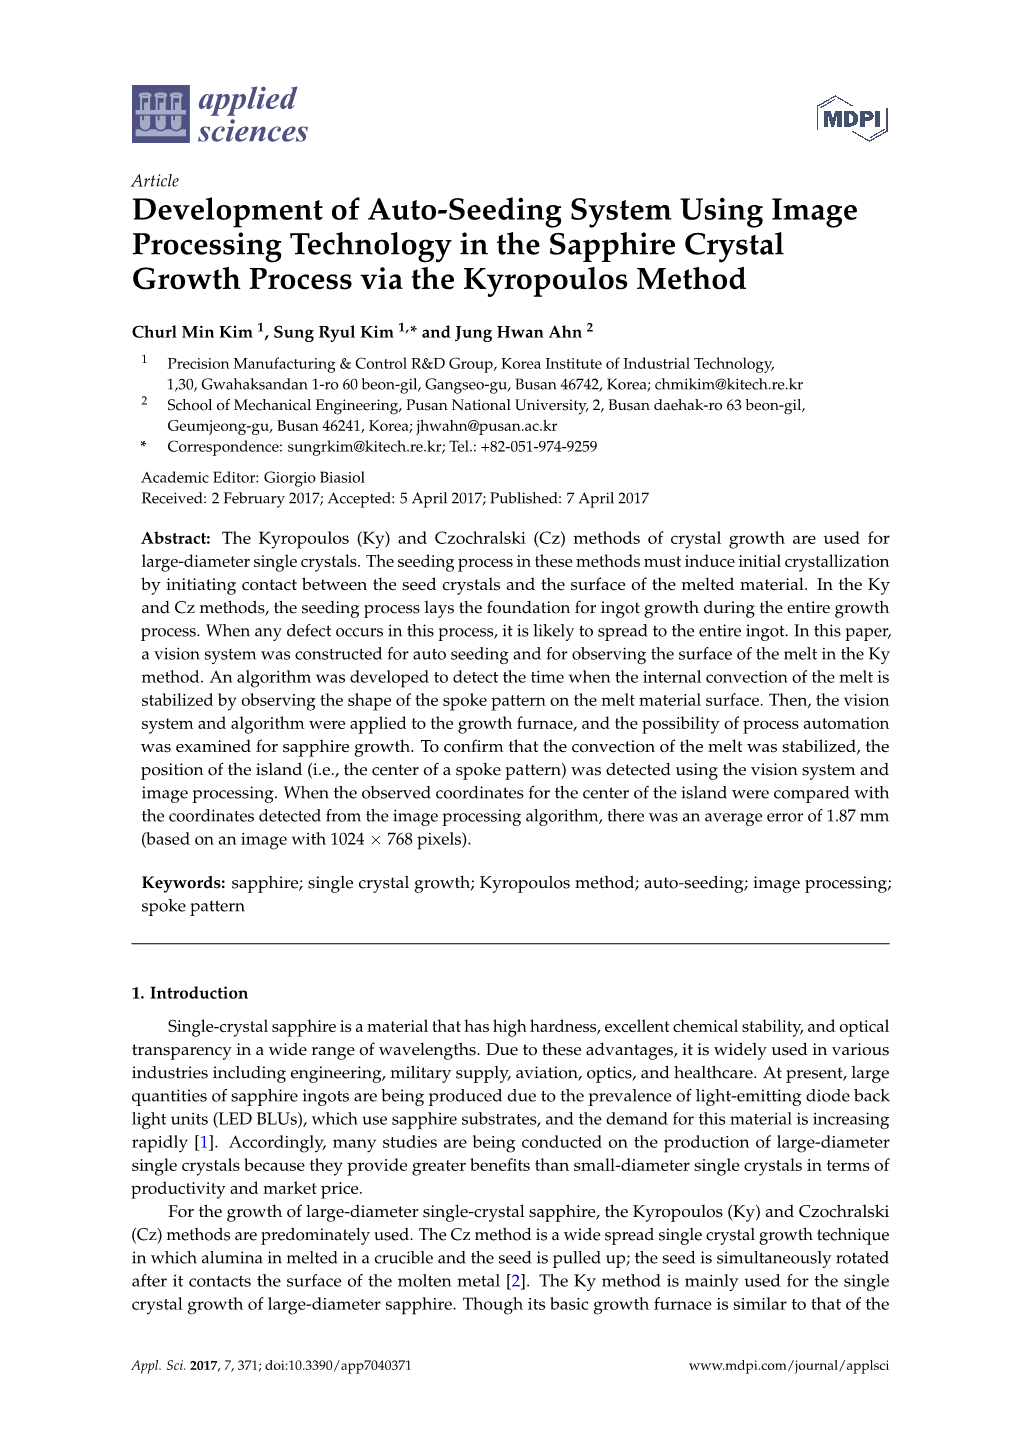 Development of Auto-Seeding System Using Image Processing Technology in the Sapphire Crystal Growth Process Via the Kyropoulos Method